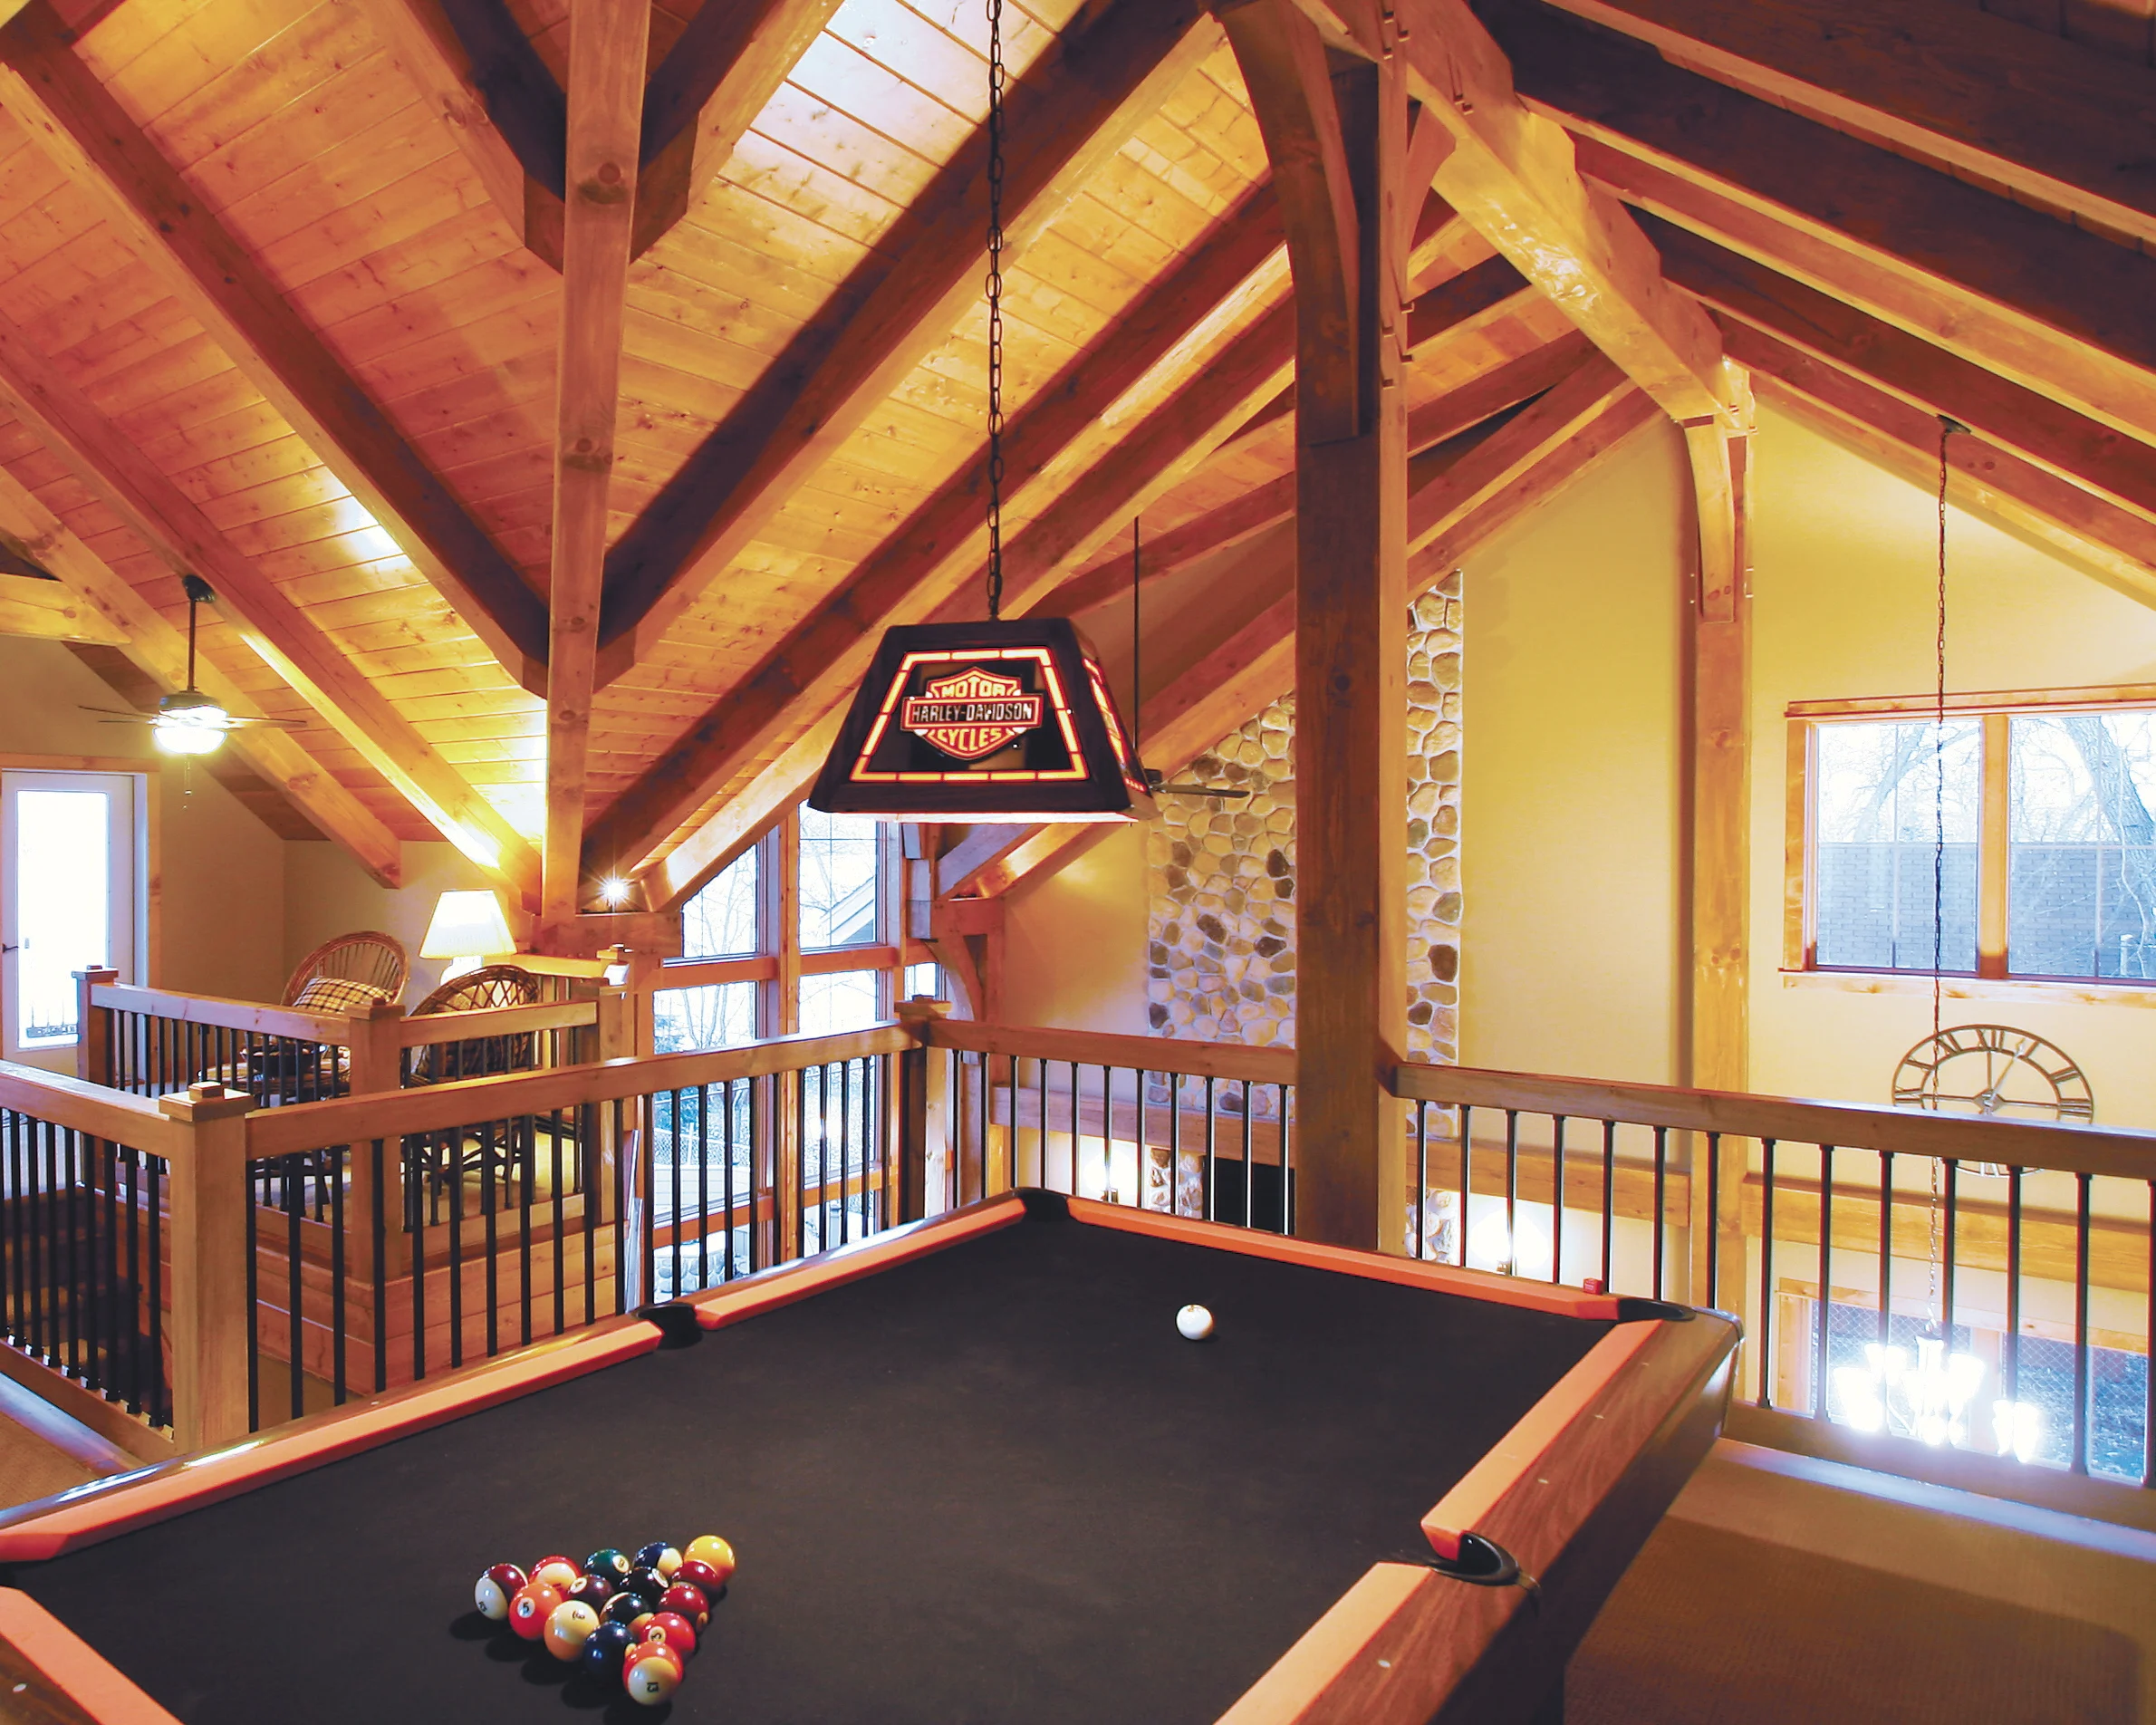 interior of timber frame home with SIP construction covered by wood ceilings; pool table and eclectic decor - photo